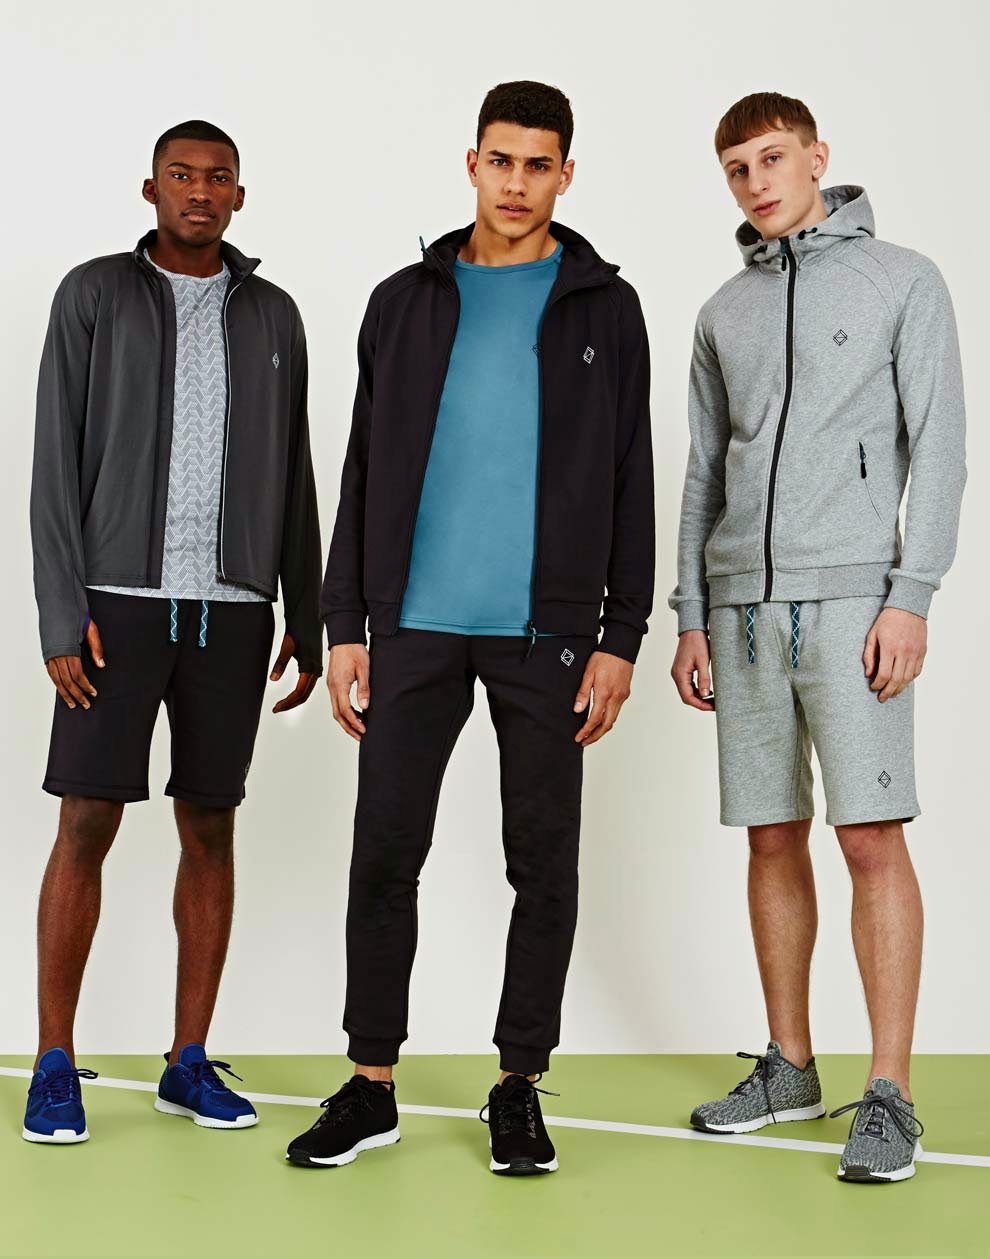 THE StreetStyle Sportswear Activewear Gets a New Look from